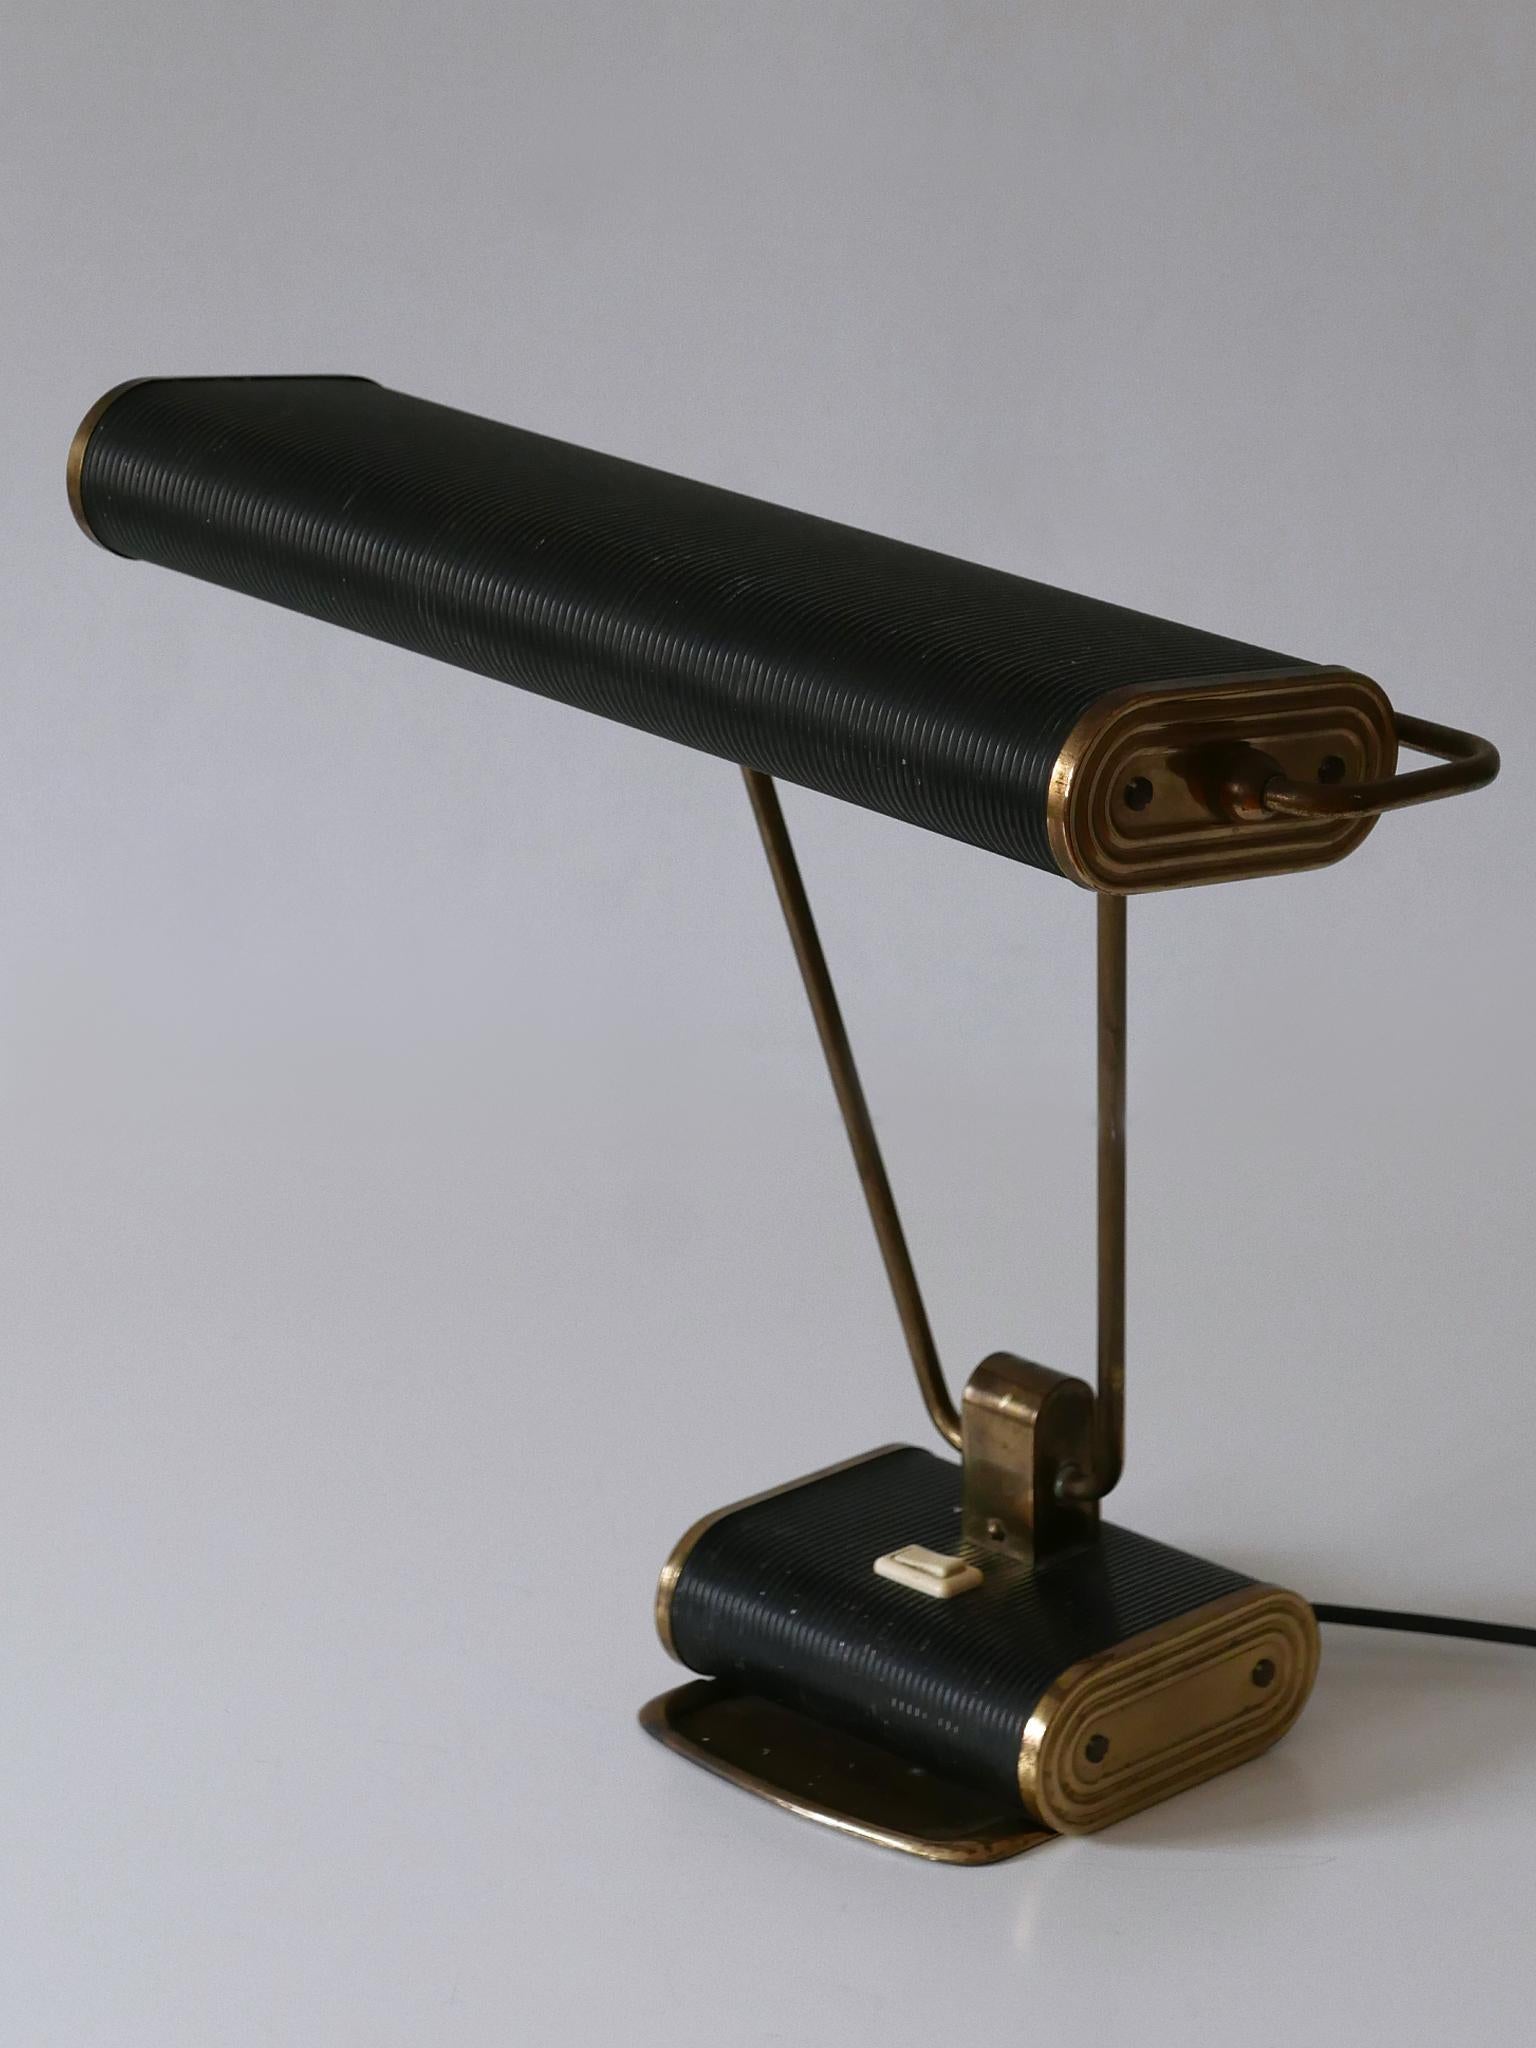 Art Deco Table Lamp or Desk Light 'No 71' by André Mounique for Jumo 1930s In Good Condition For Sale In Munich, DE